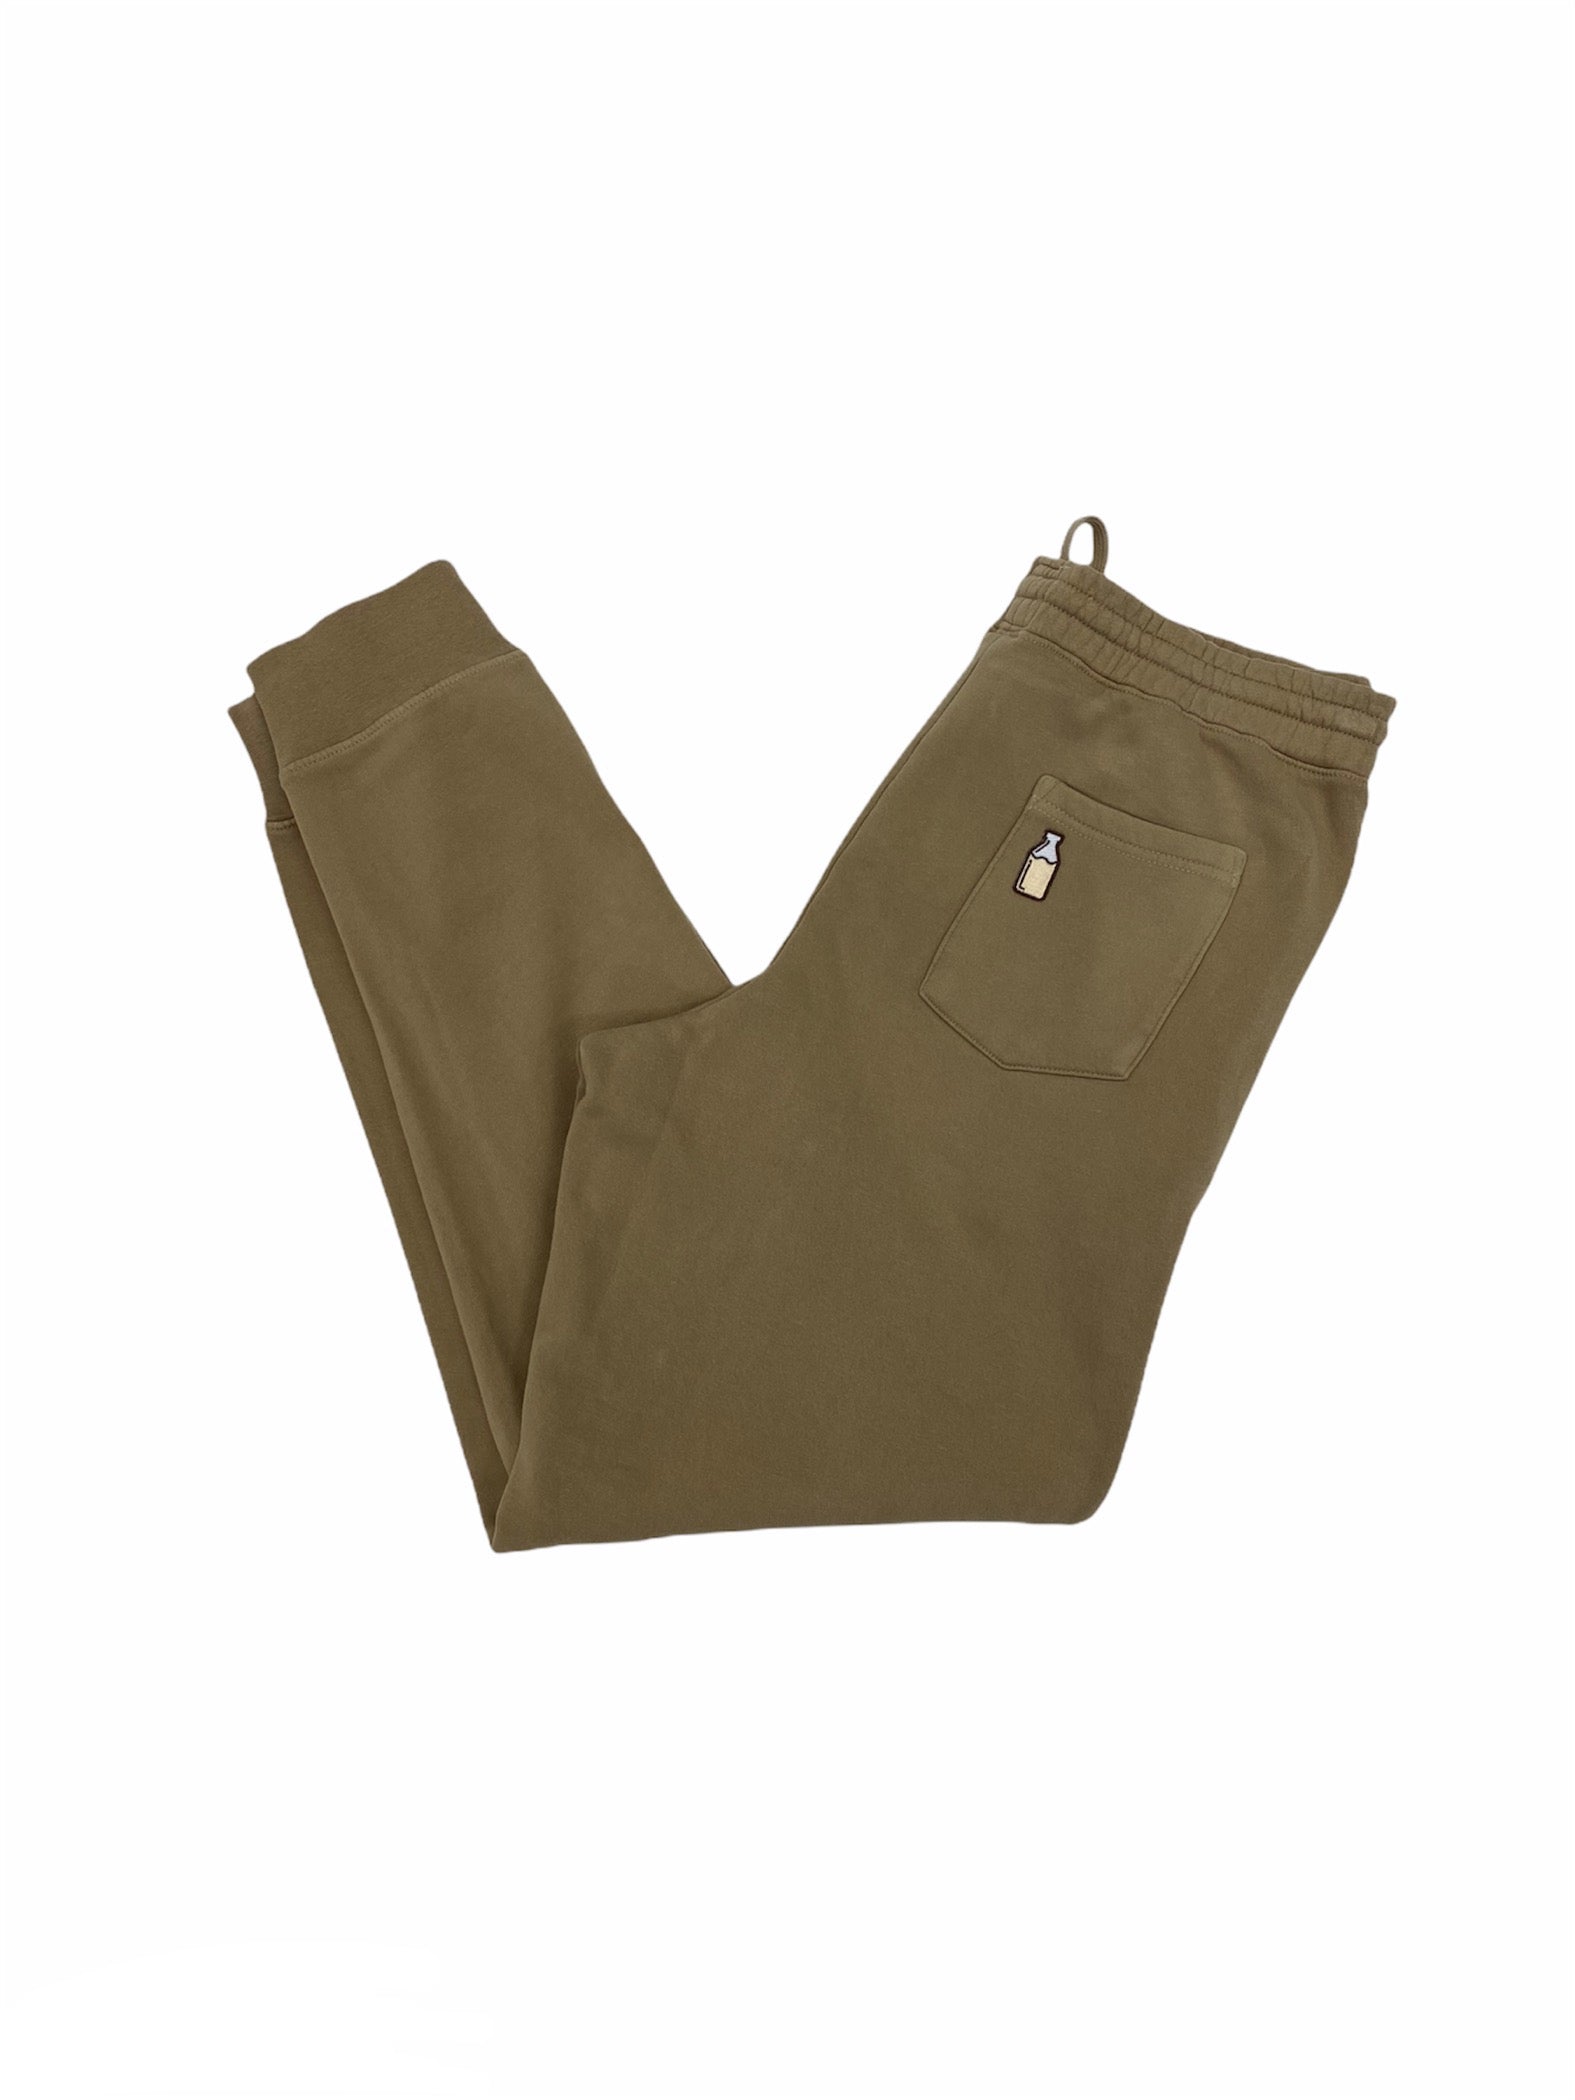 Country Club Sweatpants - Small / Beige